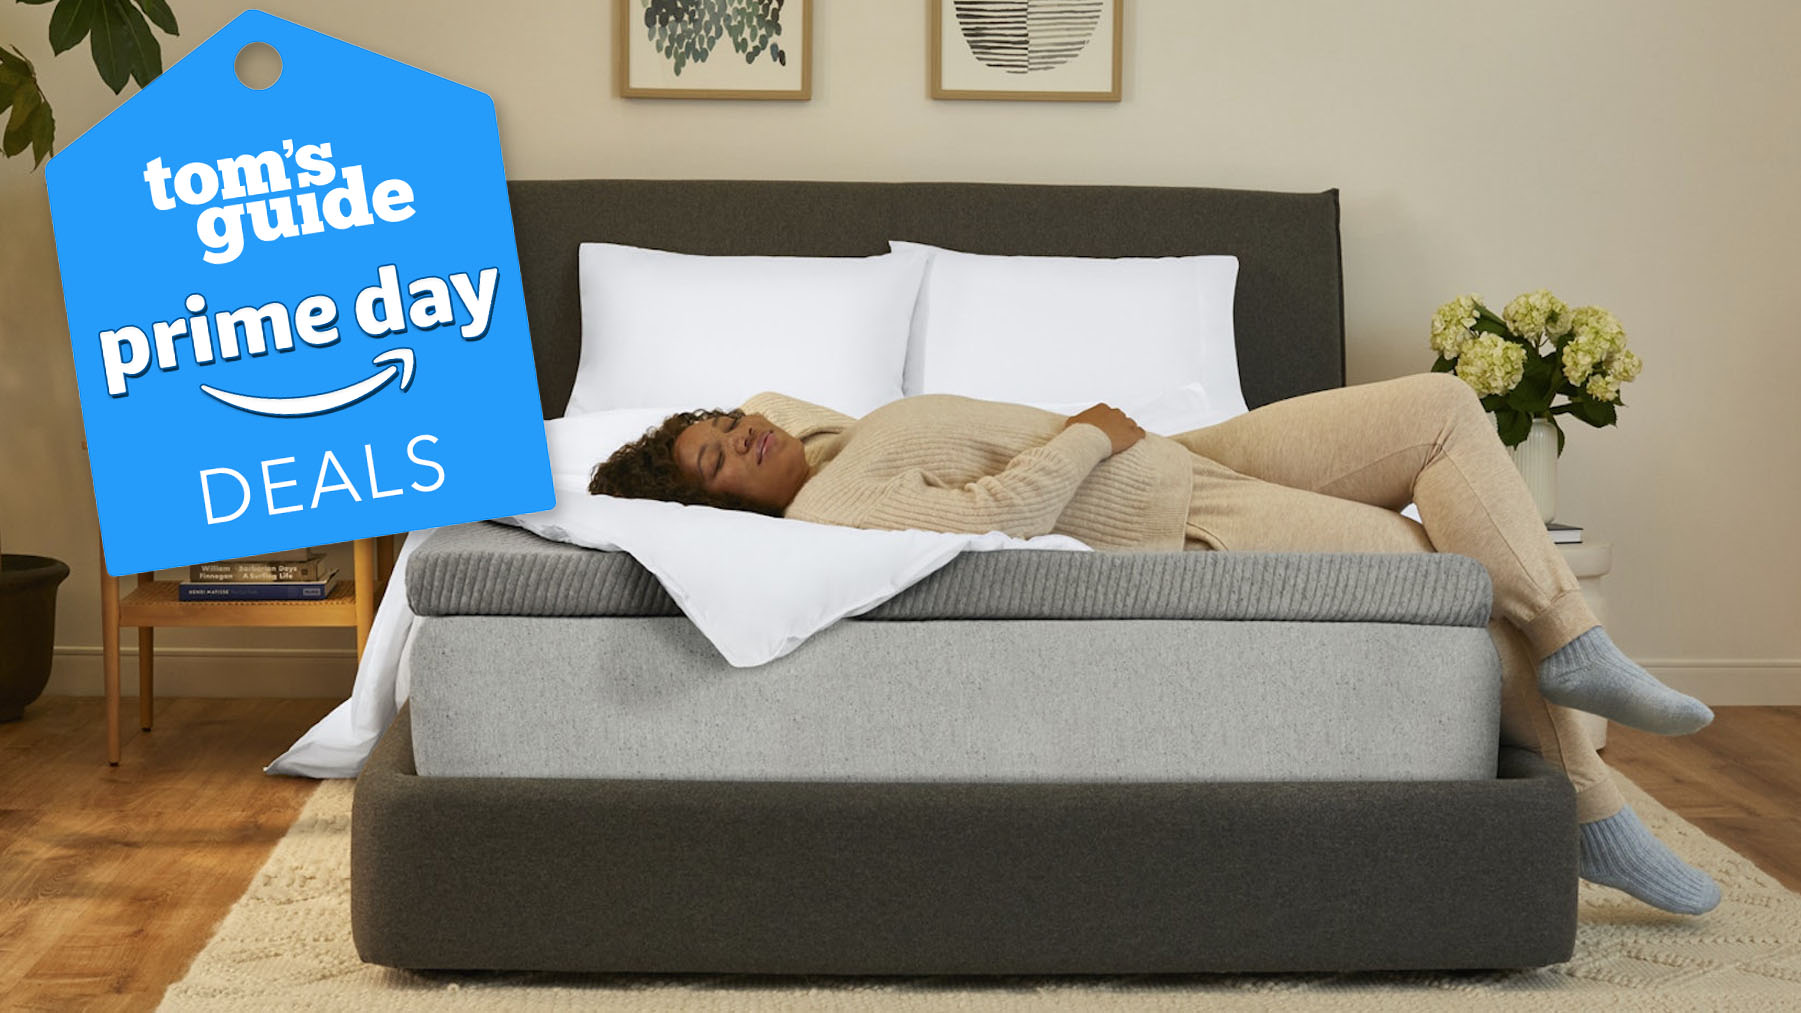 Dræbte sundhed Hound 7 cheap mattress topper deals still available – upgrade your bed from $25 |  Tom's Guide